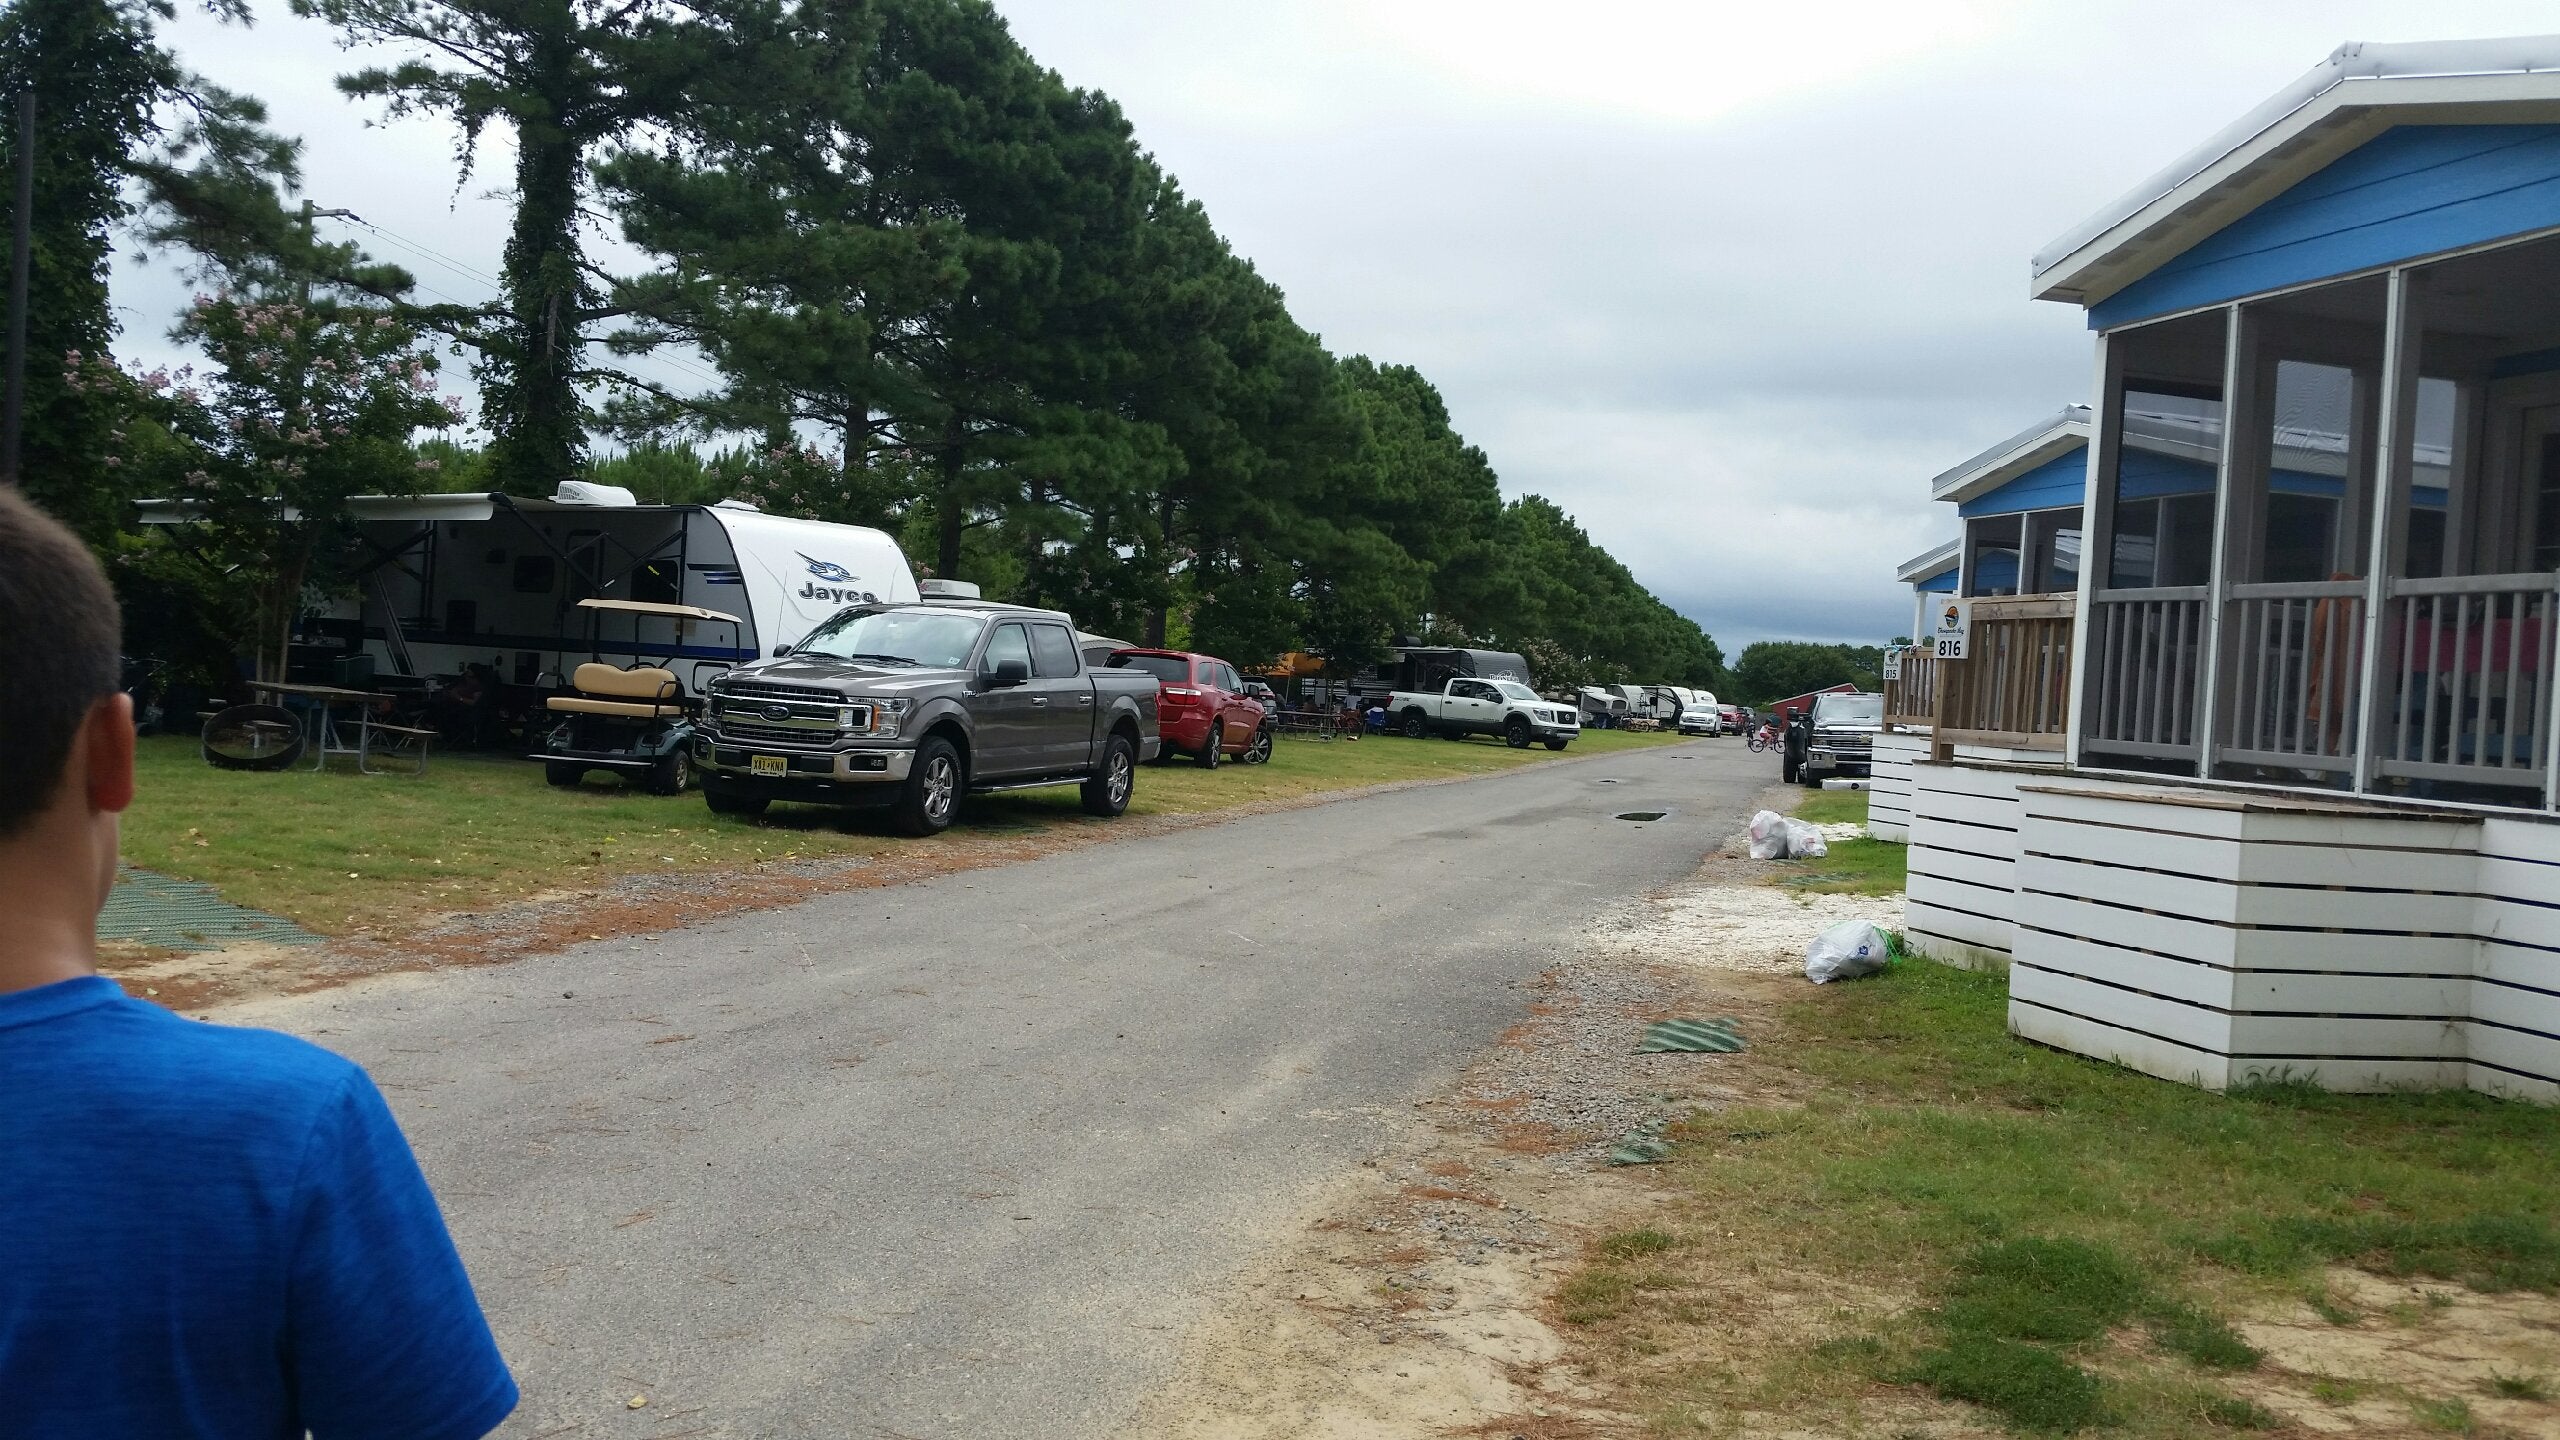 One of the aisles with campsites & cabins